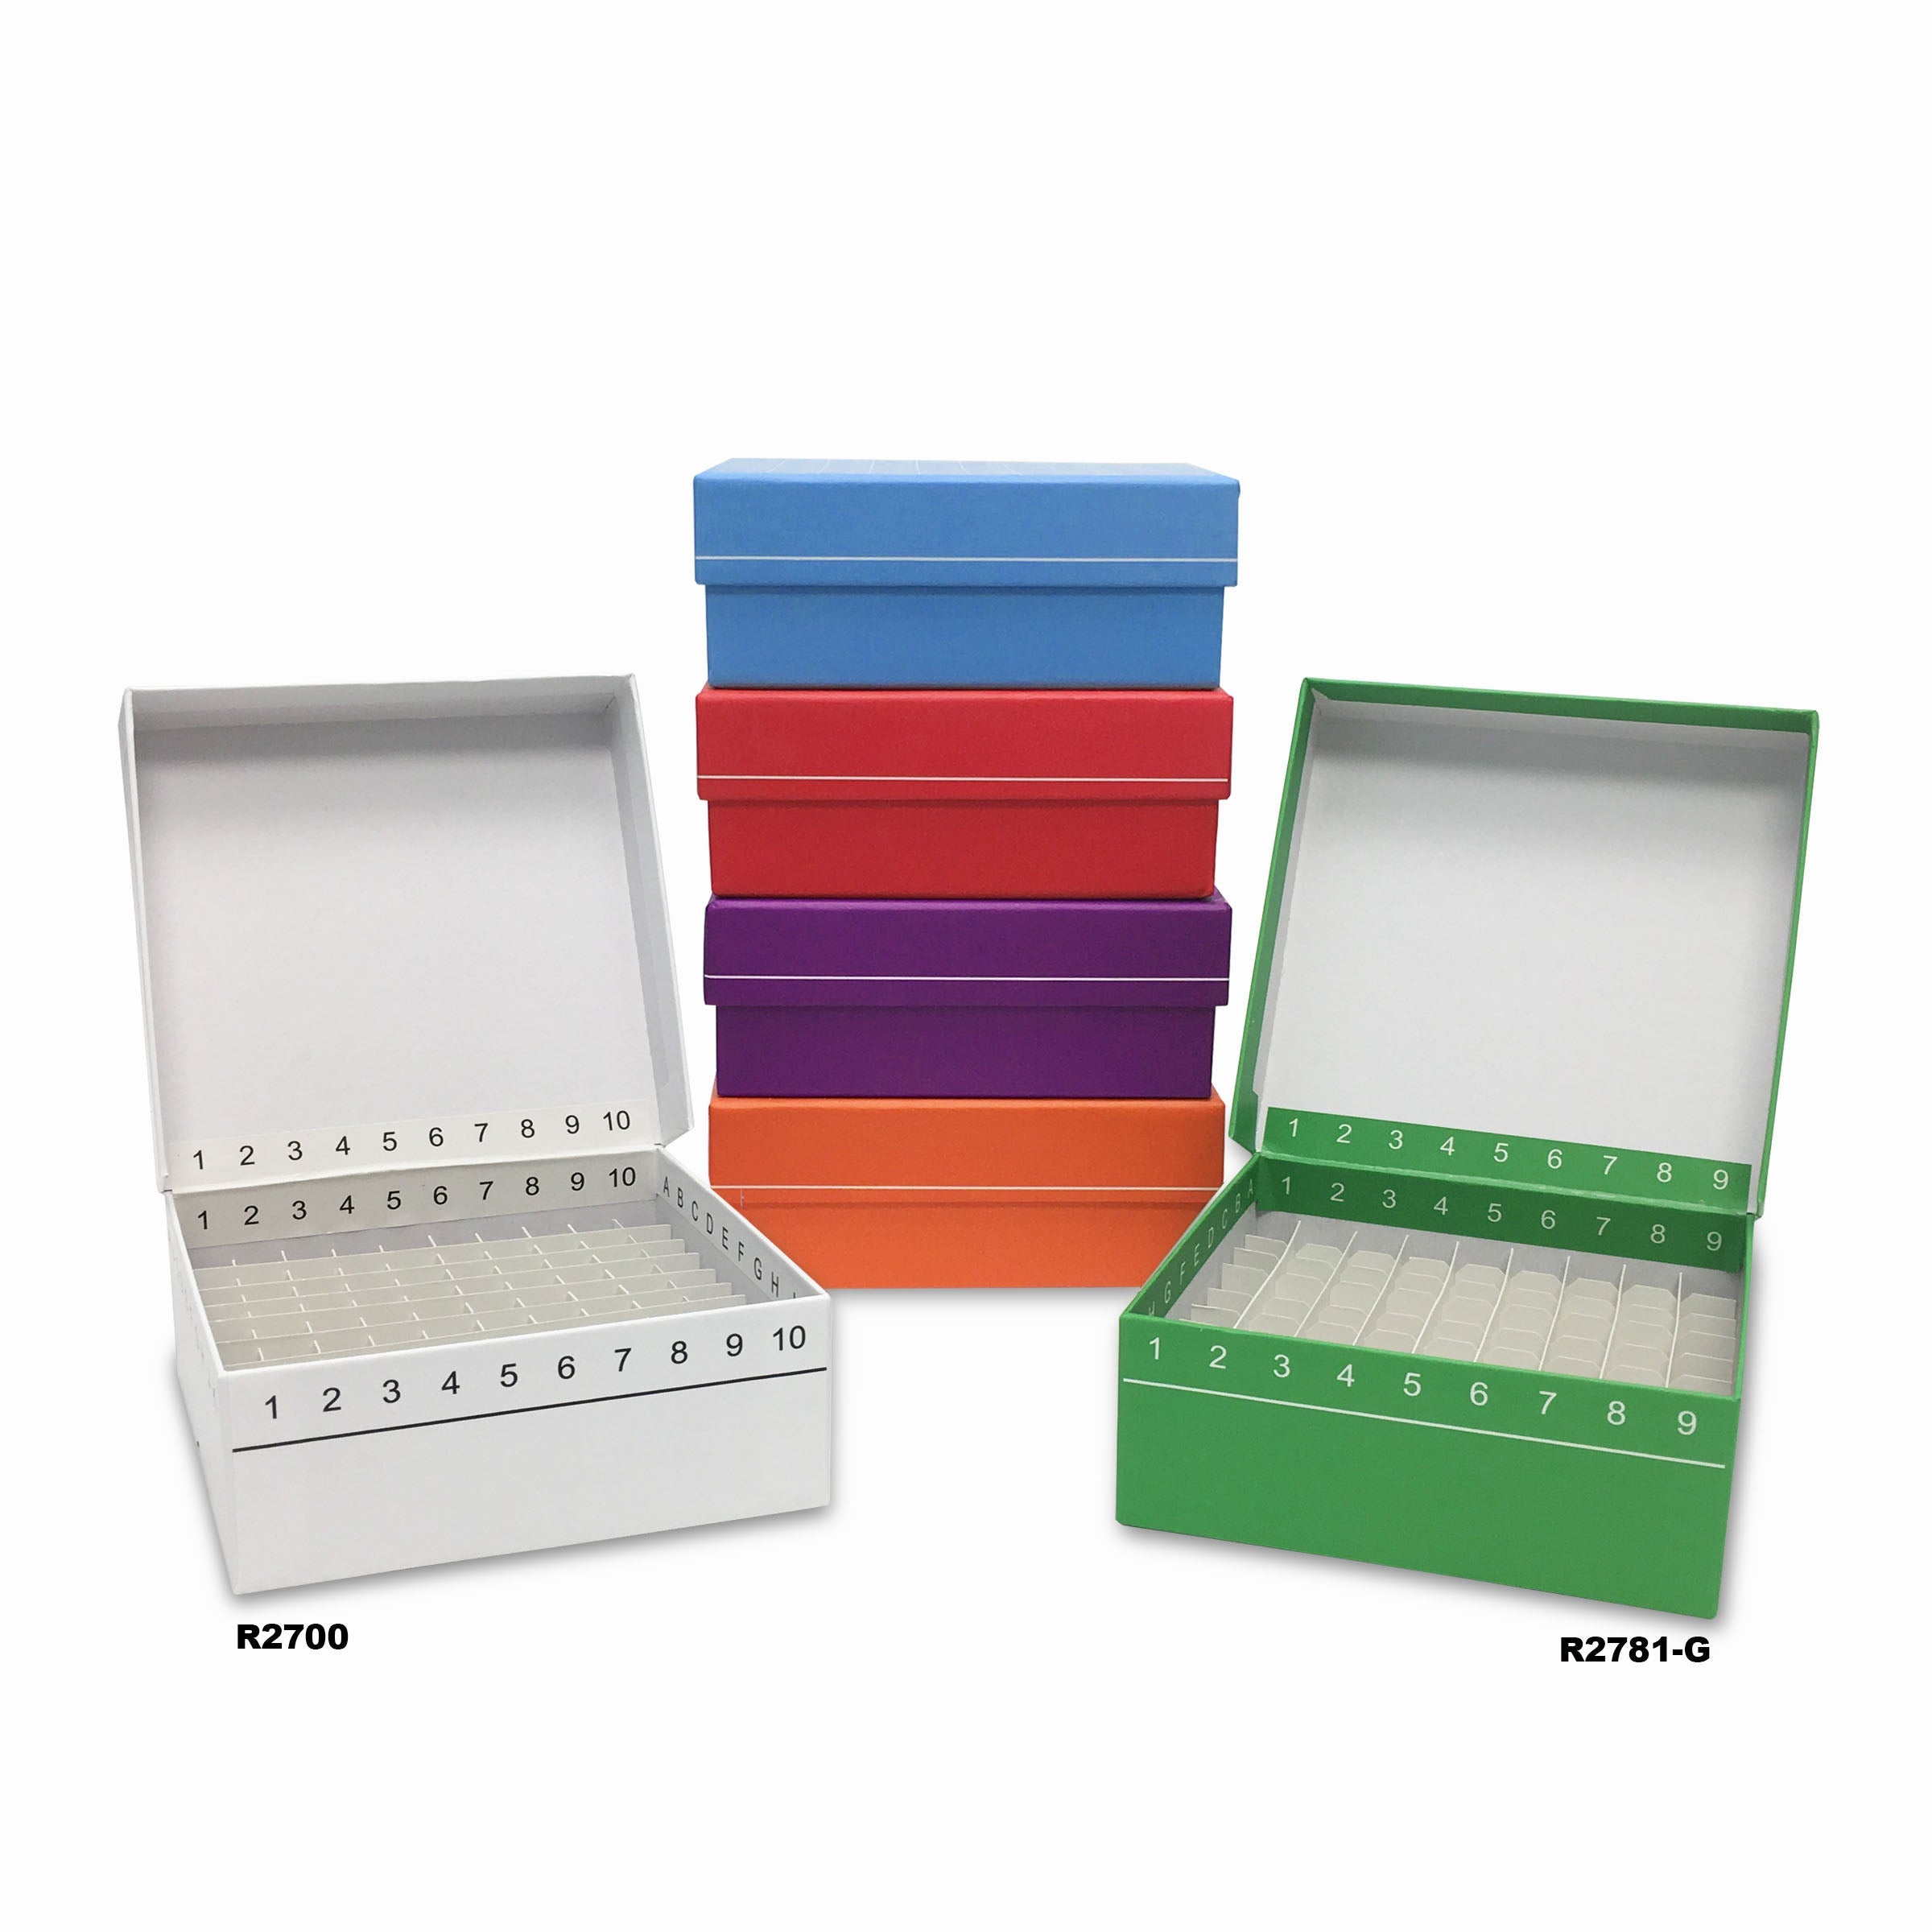 MTC Bio R2781, Fliptop Carboard Freezer Box with Attached Hinged Lid, 81-Place, White, 5/pk